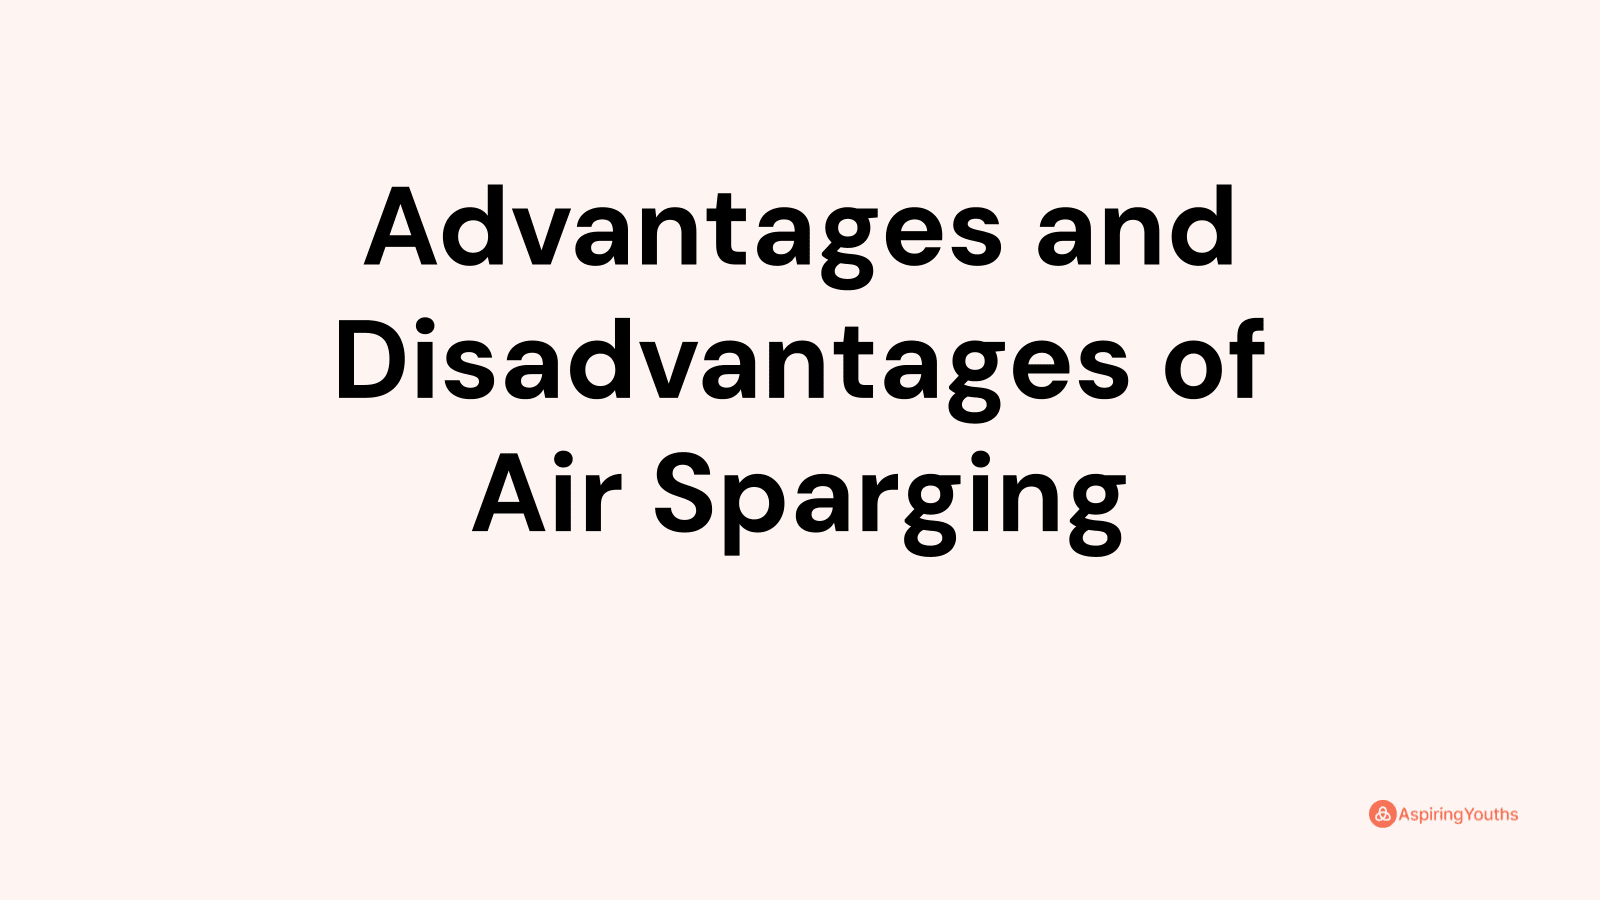 Advantages and disadvantages of Air Sparging